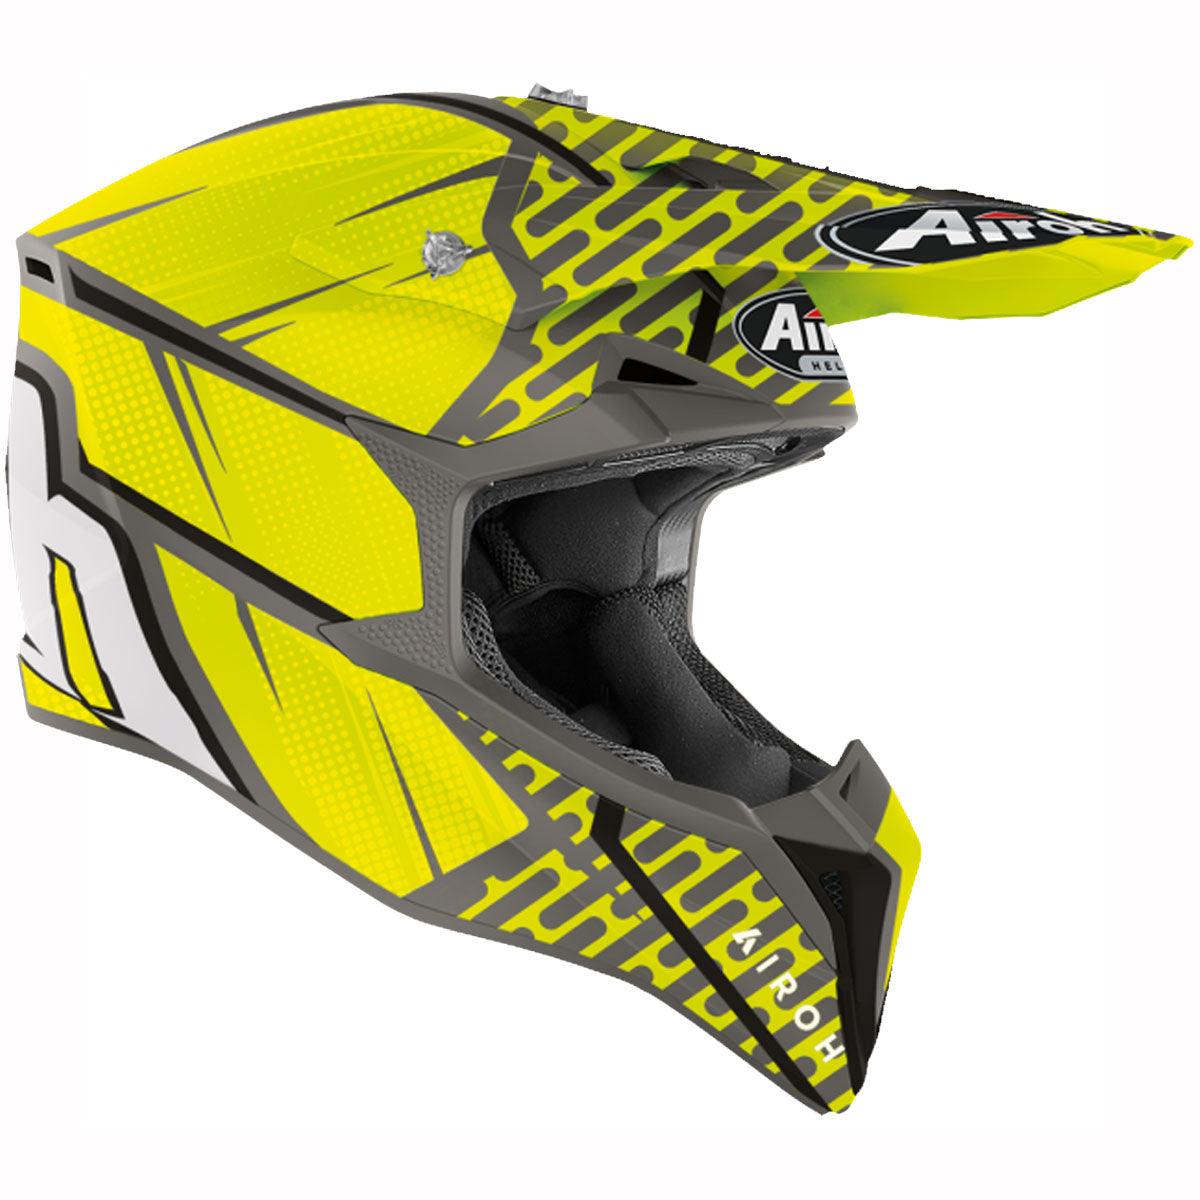 • SHELL: ULTRALIGHT HRT SHELL (HIGH RESISTANT THERMOPLASTIC) • 2 shell sizes (XS-M, L-XXL) • Ventilation: Front vents, chin guard vent, rear extractors • Lining: Removable and washable inner lining, Hypoallergenic • 1480g +-50g • ECE 22.05 approved